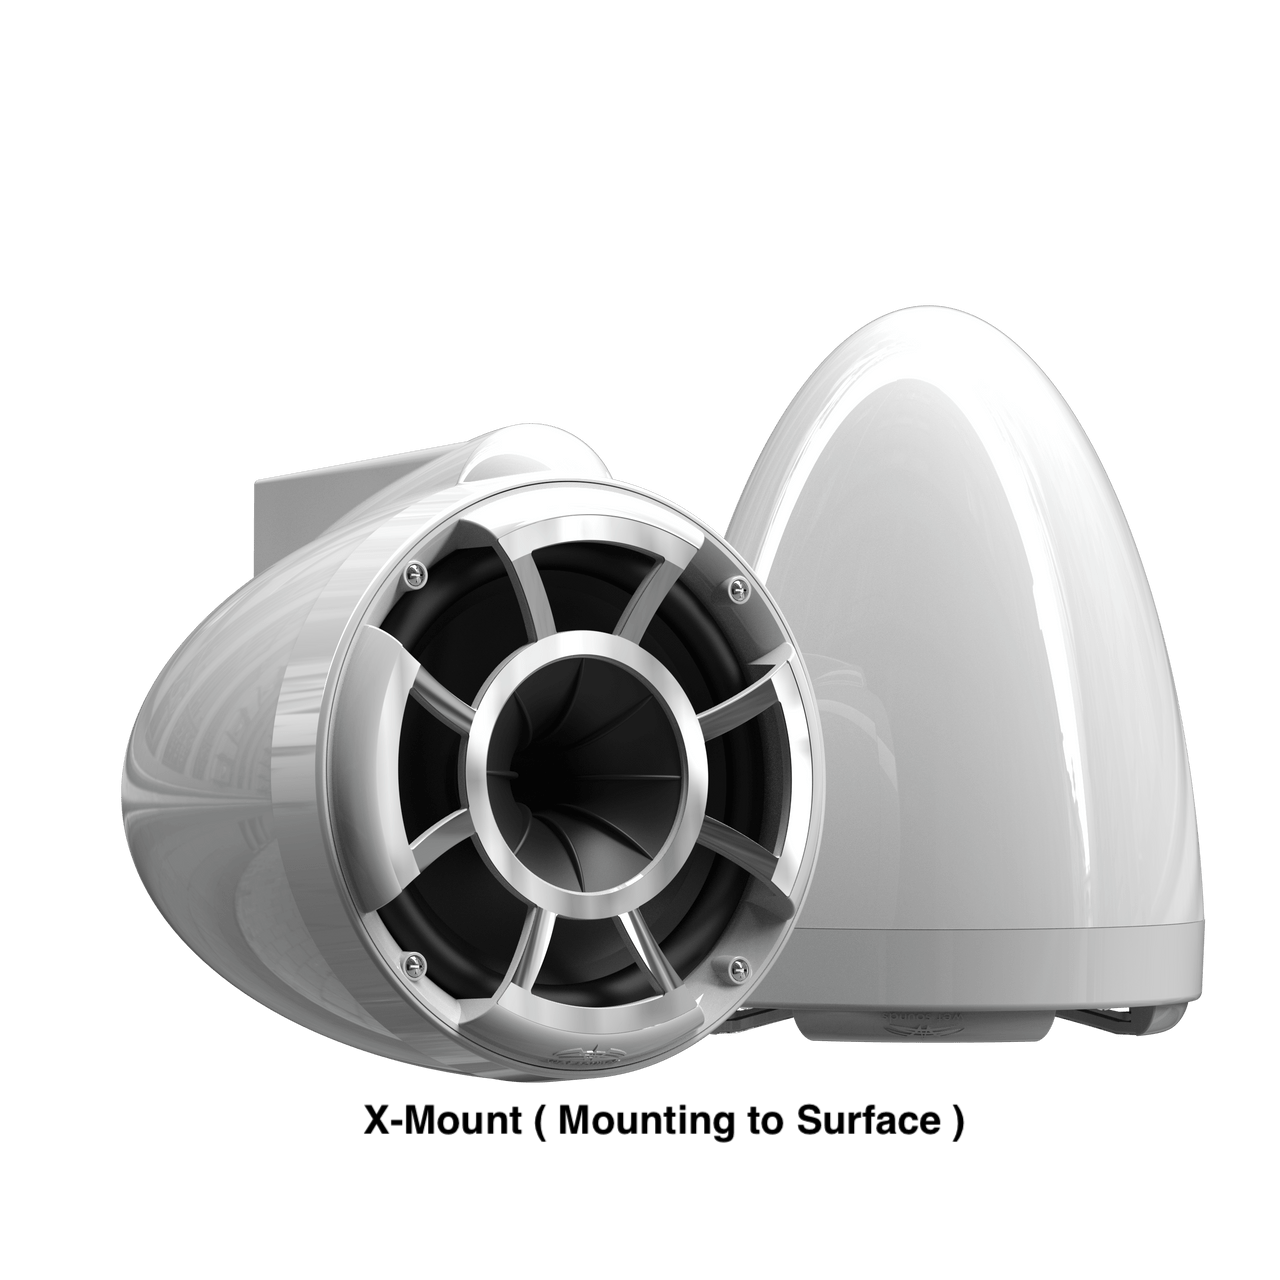 Wet Sounds Boat Wake Tower Speakers X-Mount ( Mounting to Surface ) Wet Sounds  REV10™ White V2 | Revolution Series 10" White Tower Speakers